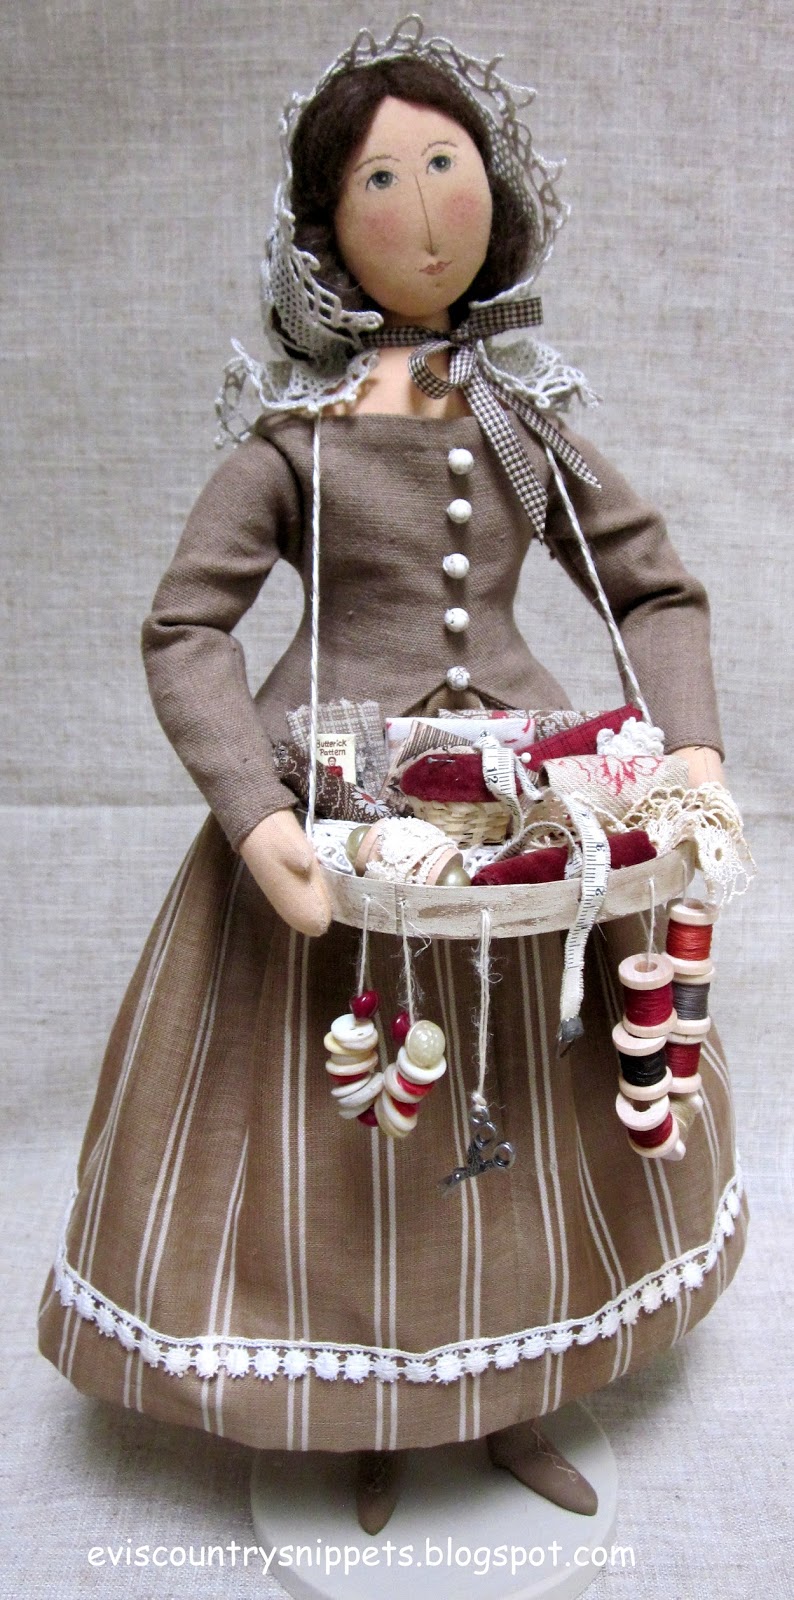 Evi 's Country Snippets Shop: SWEET DOLLS TO FIND A NEW HOME